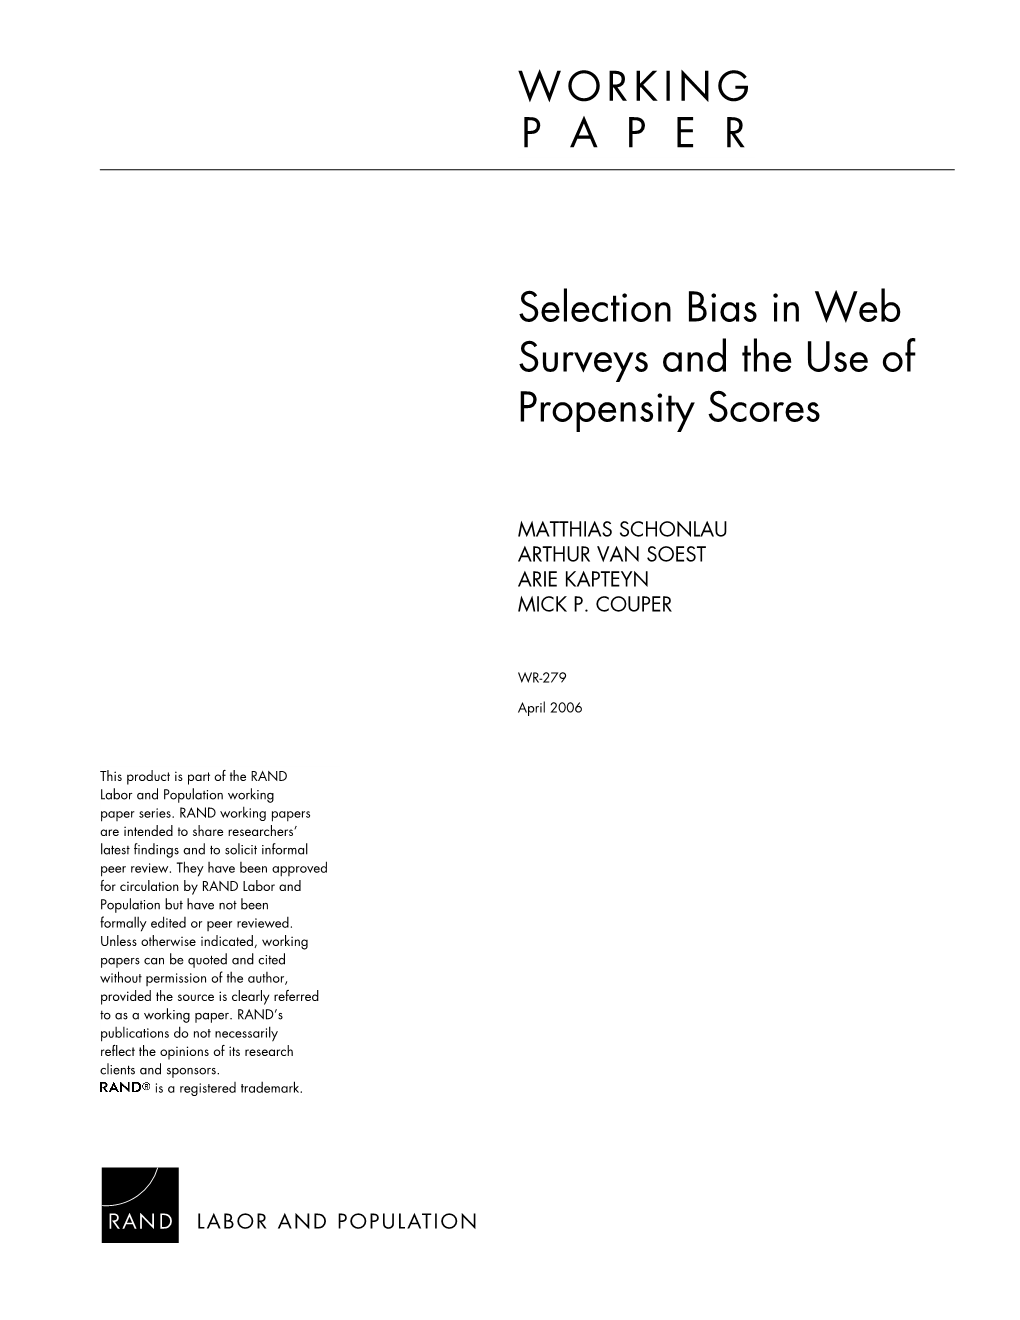 Selection Bias in Web Surveys and the Use of Propensity Scores